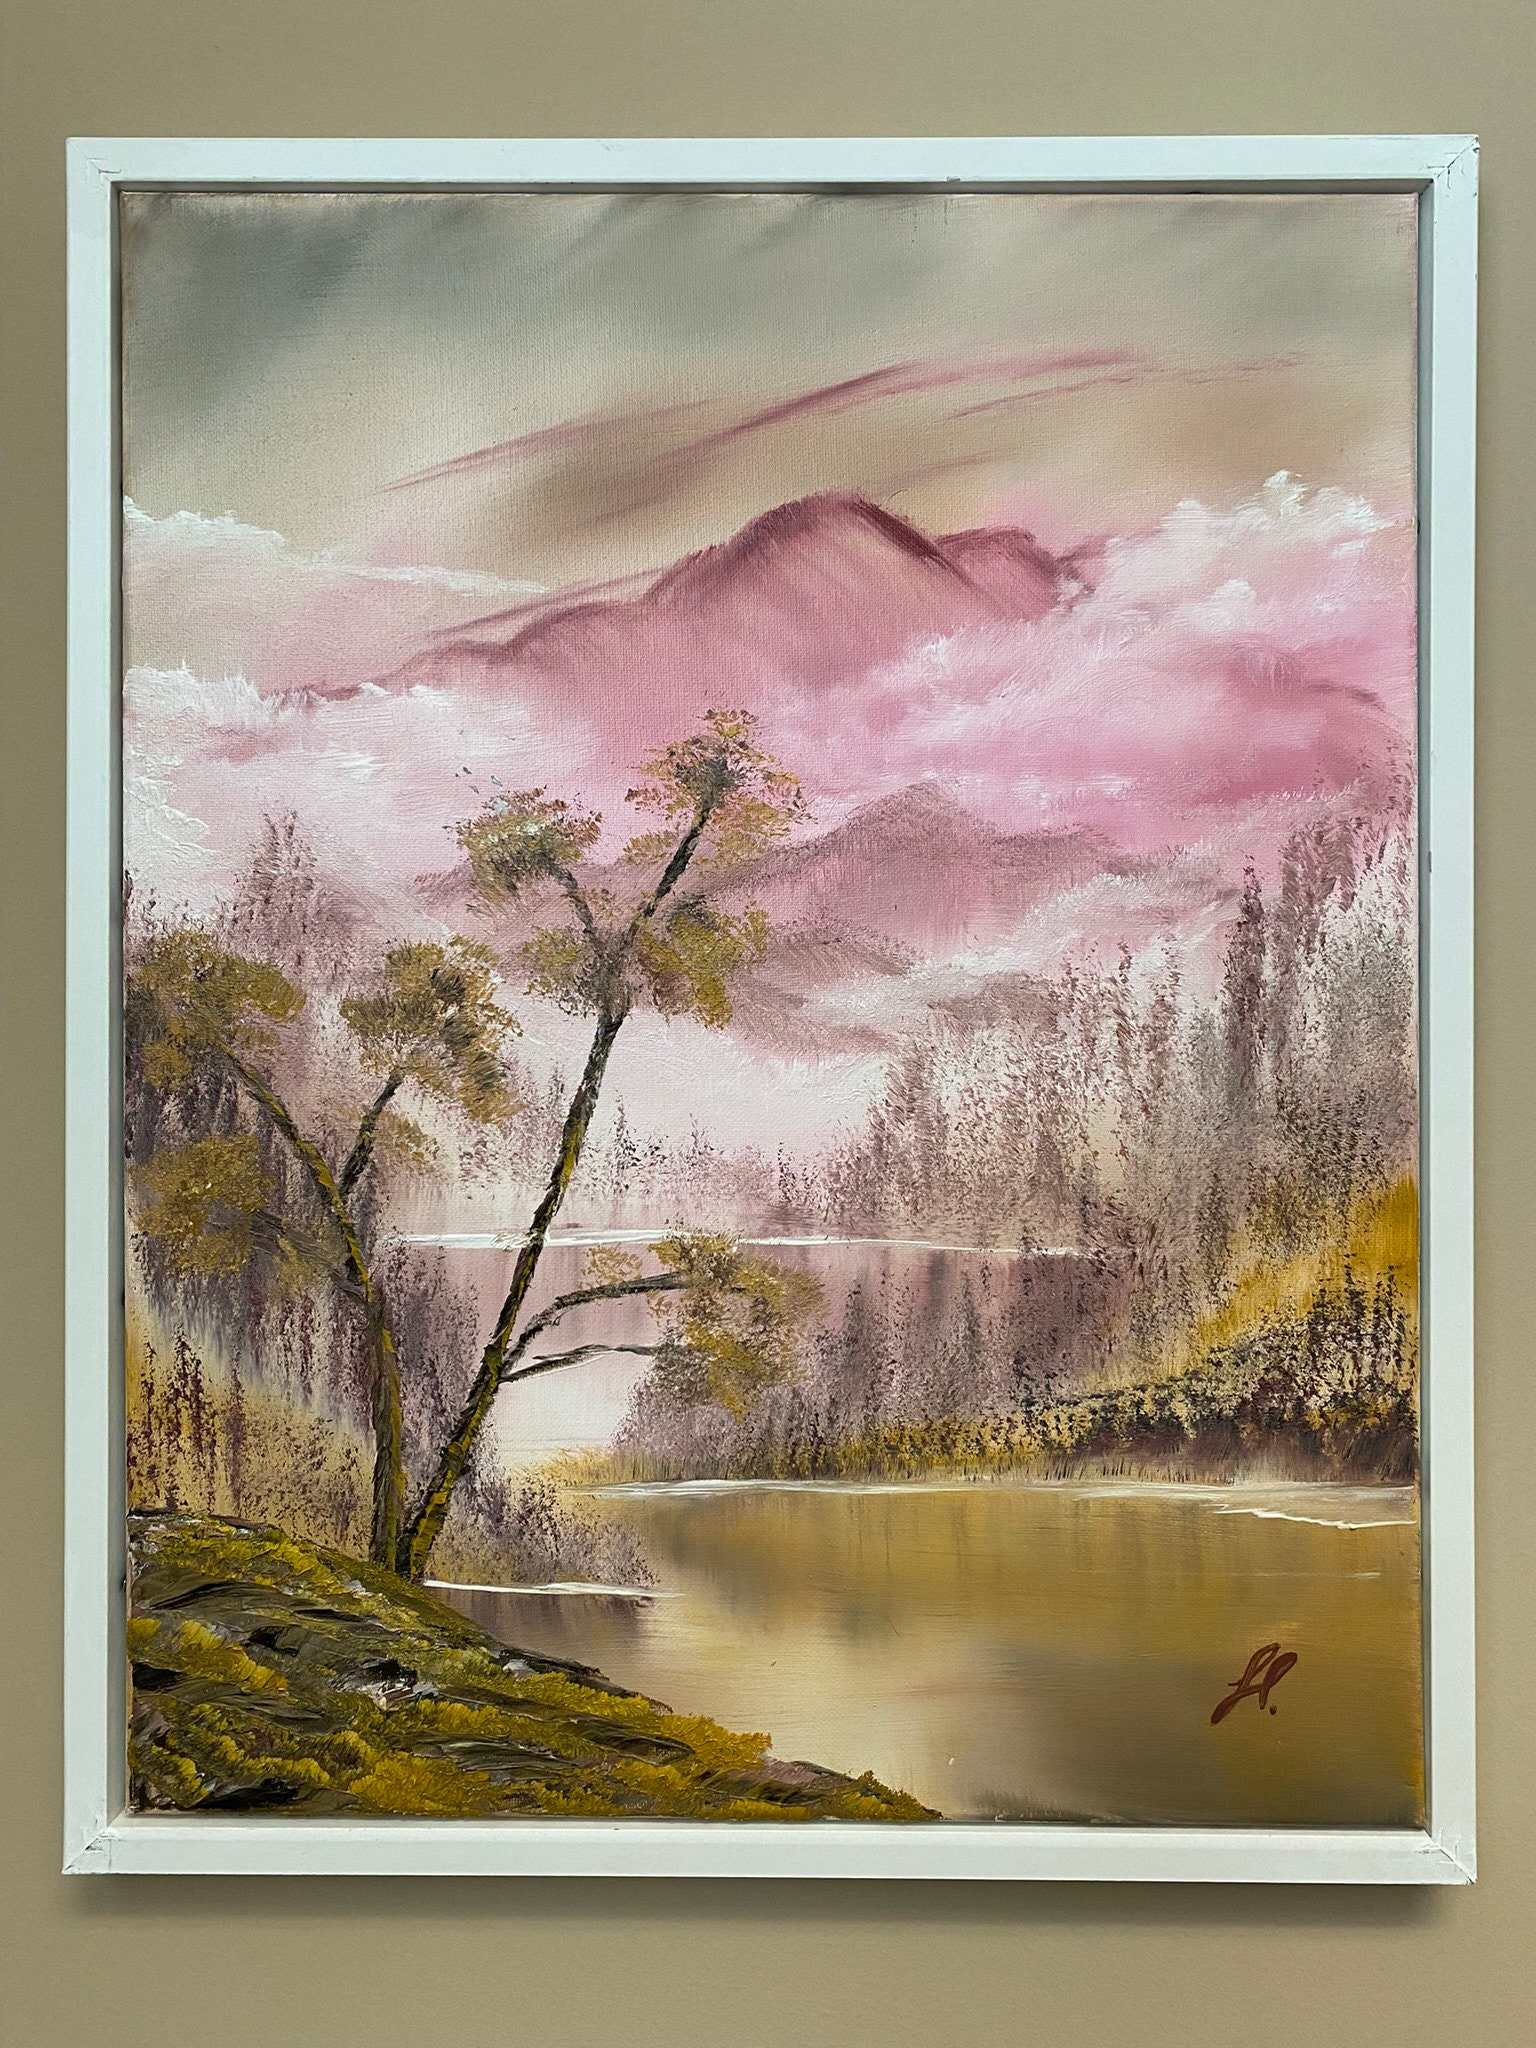 Bob Ross style Oil Painting 18x24 Canvas Original “Reflections” Home Decor